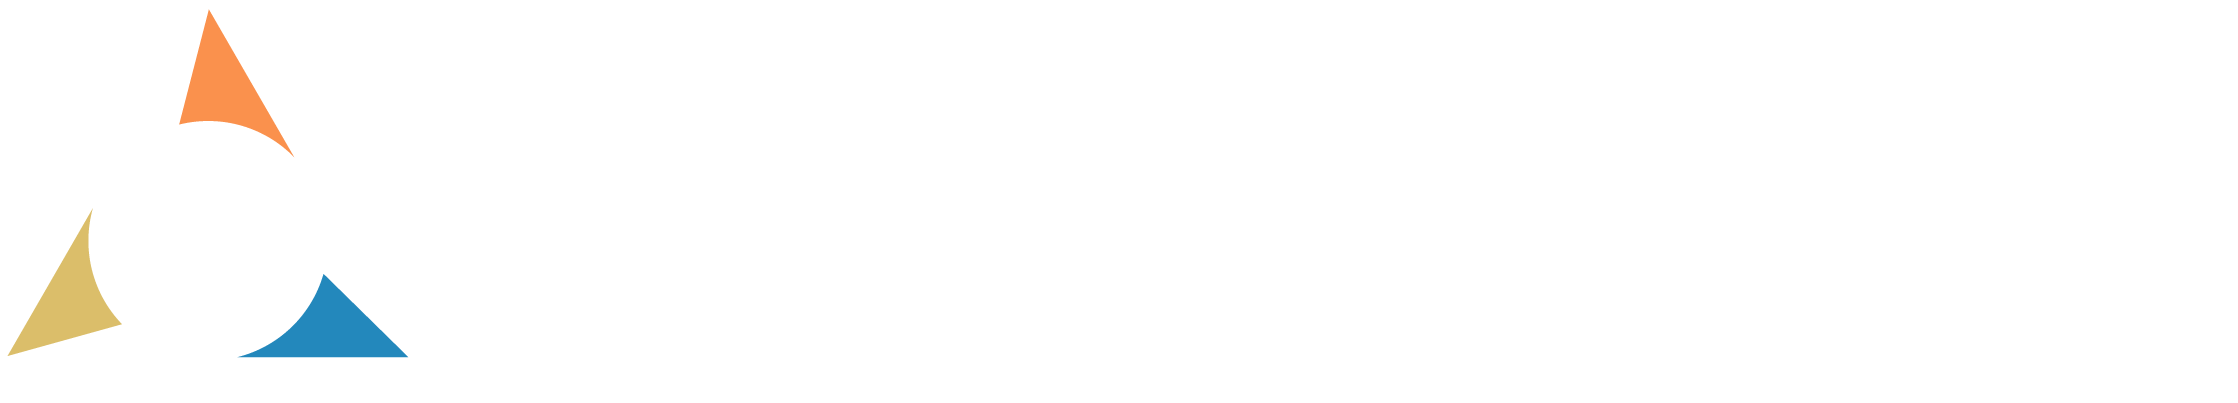 Equilateral.io